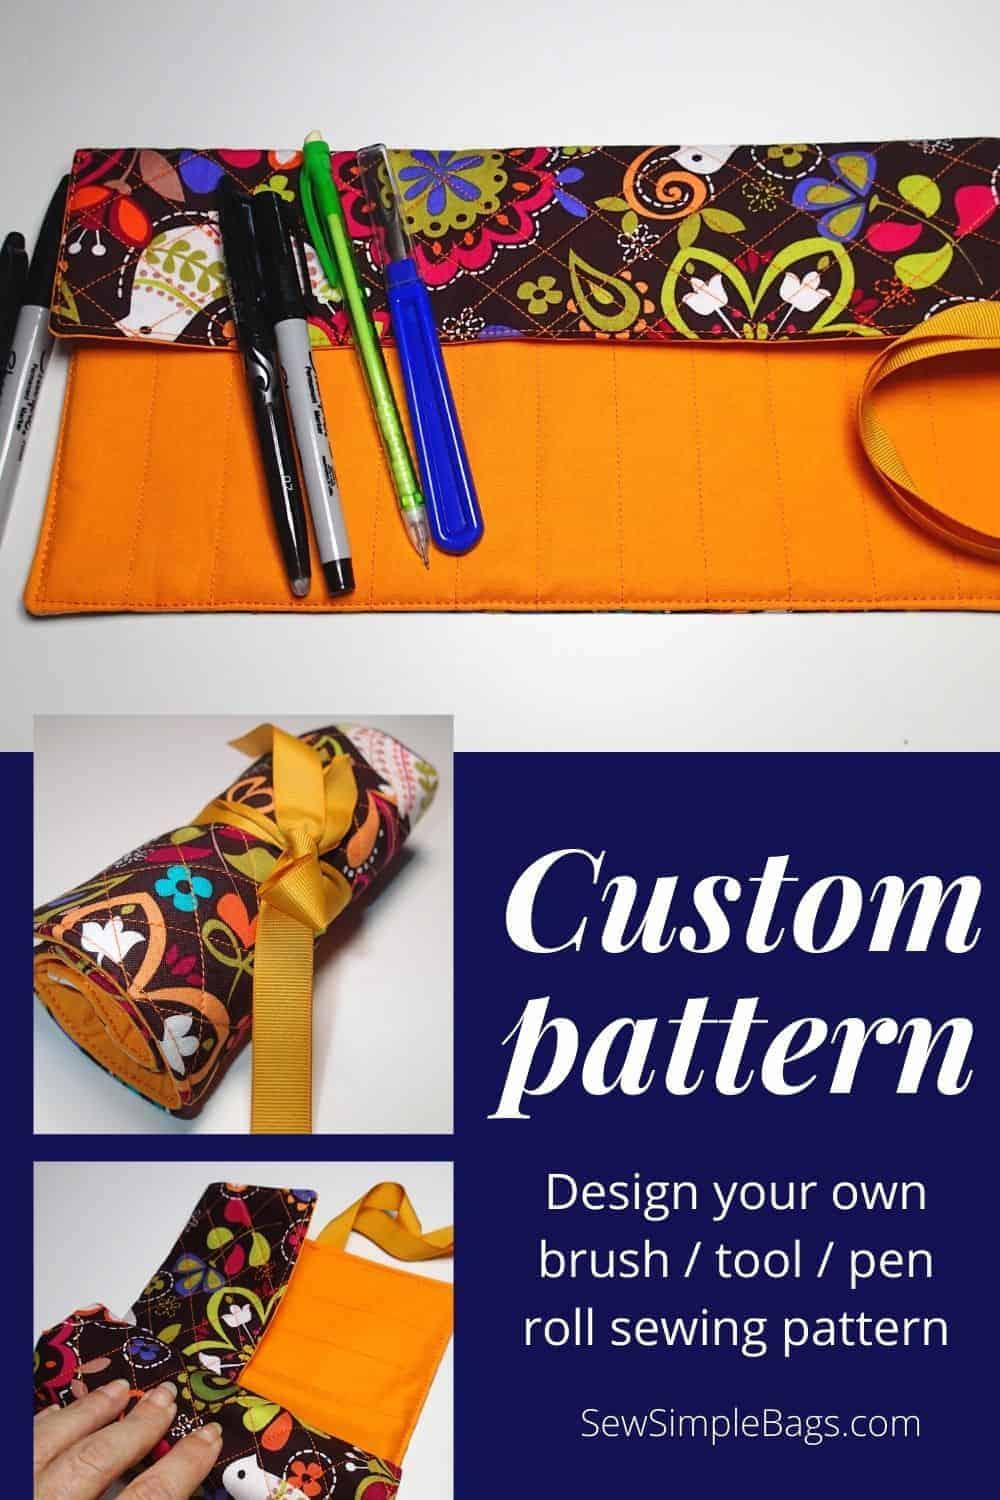 Sew your own custom sized tool roll. Design your own bag sewing pattern for a tool caddy to sew.